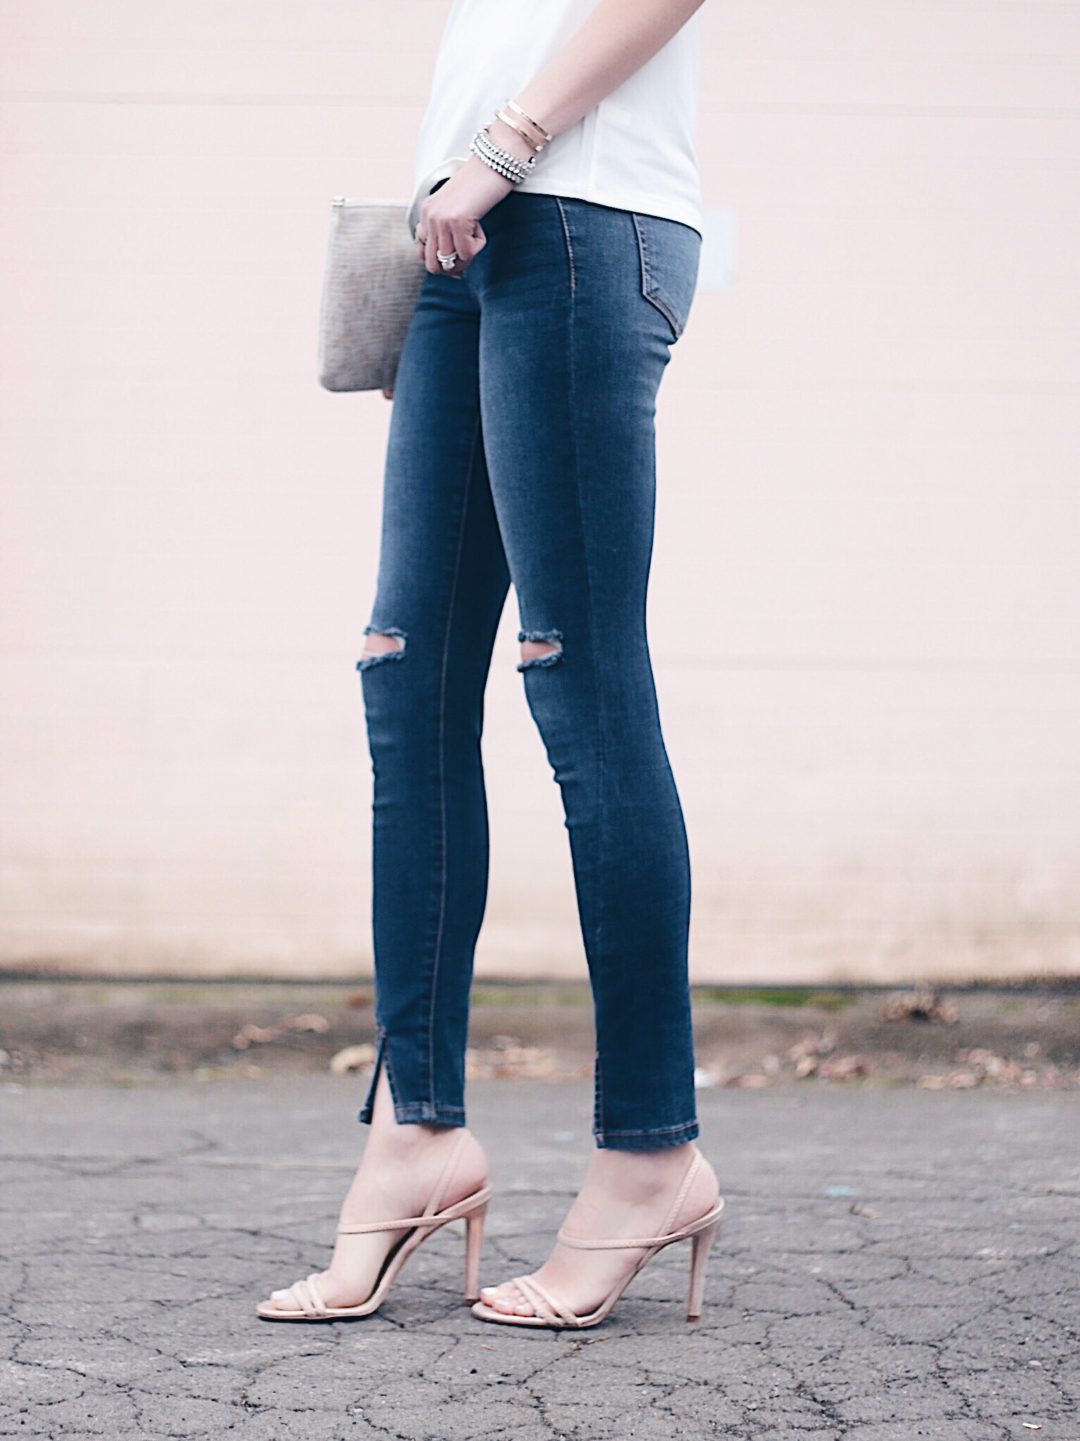 strappy heel sandal with skinny jeans